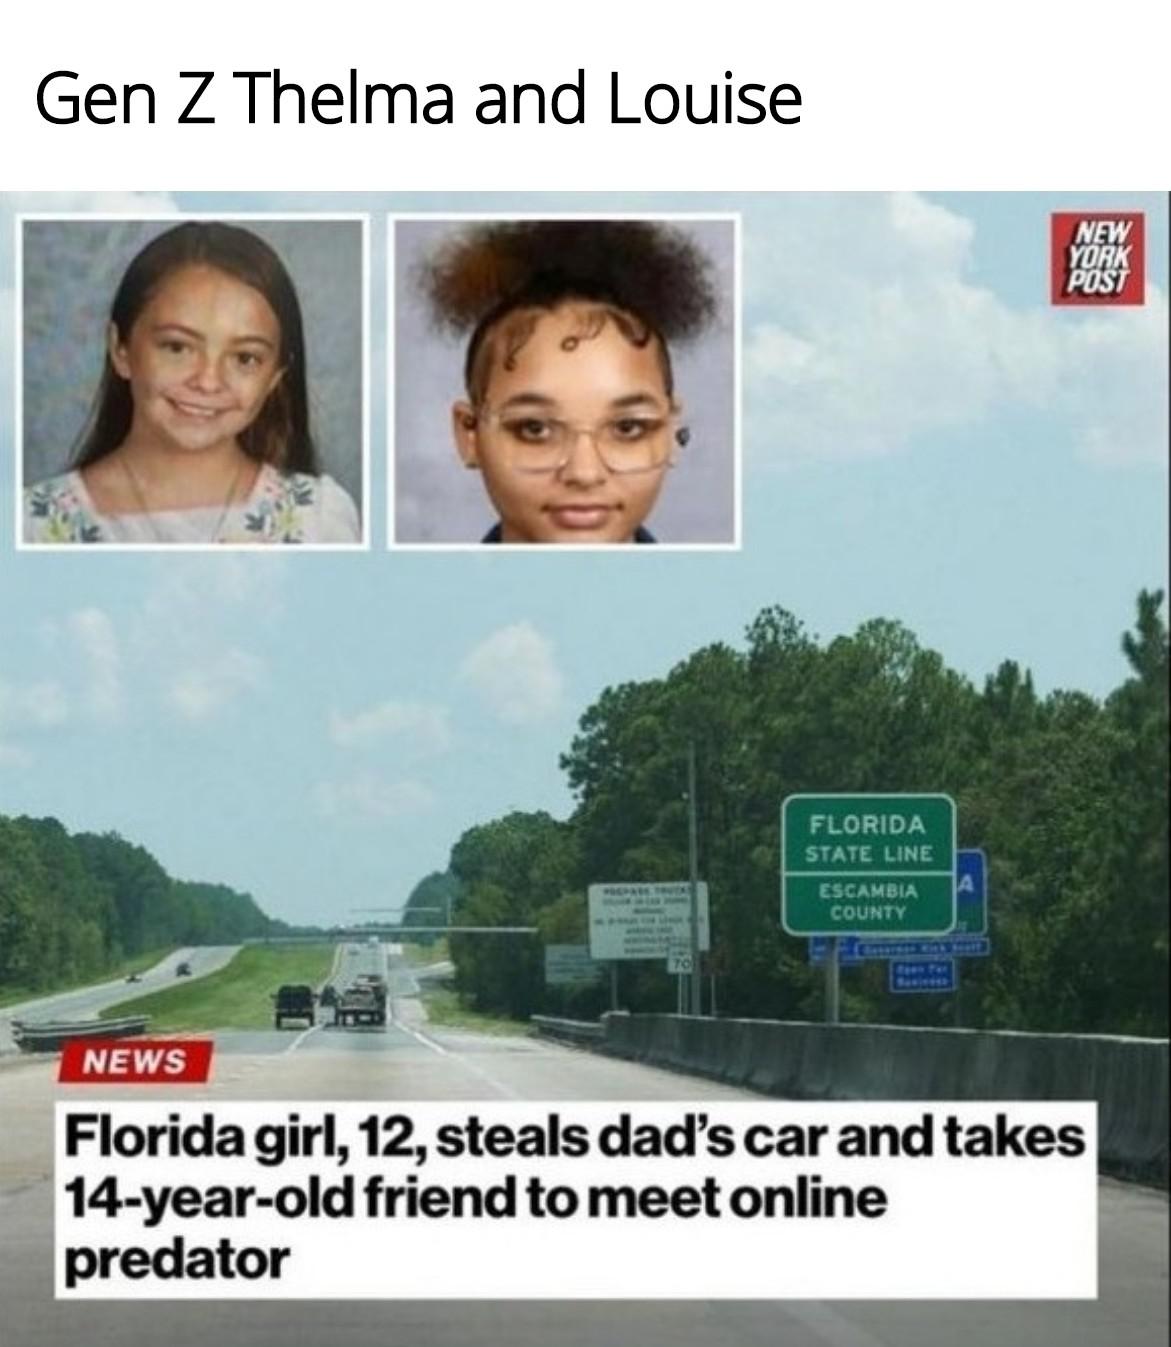 dank memes - media - Gen Z Thelma and Louise Pospare Florida State Line Escambia County A New York Post News Florida girl, 12, steals dad's car and takes 14yearold friend to meet online predator